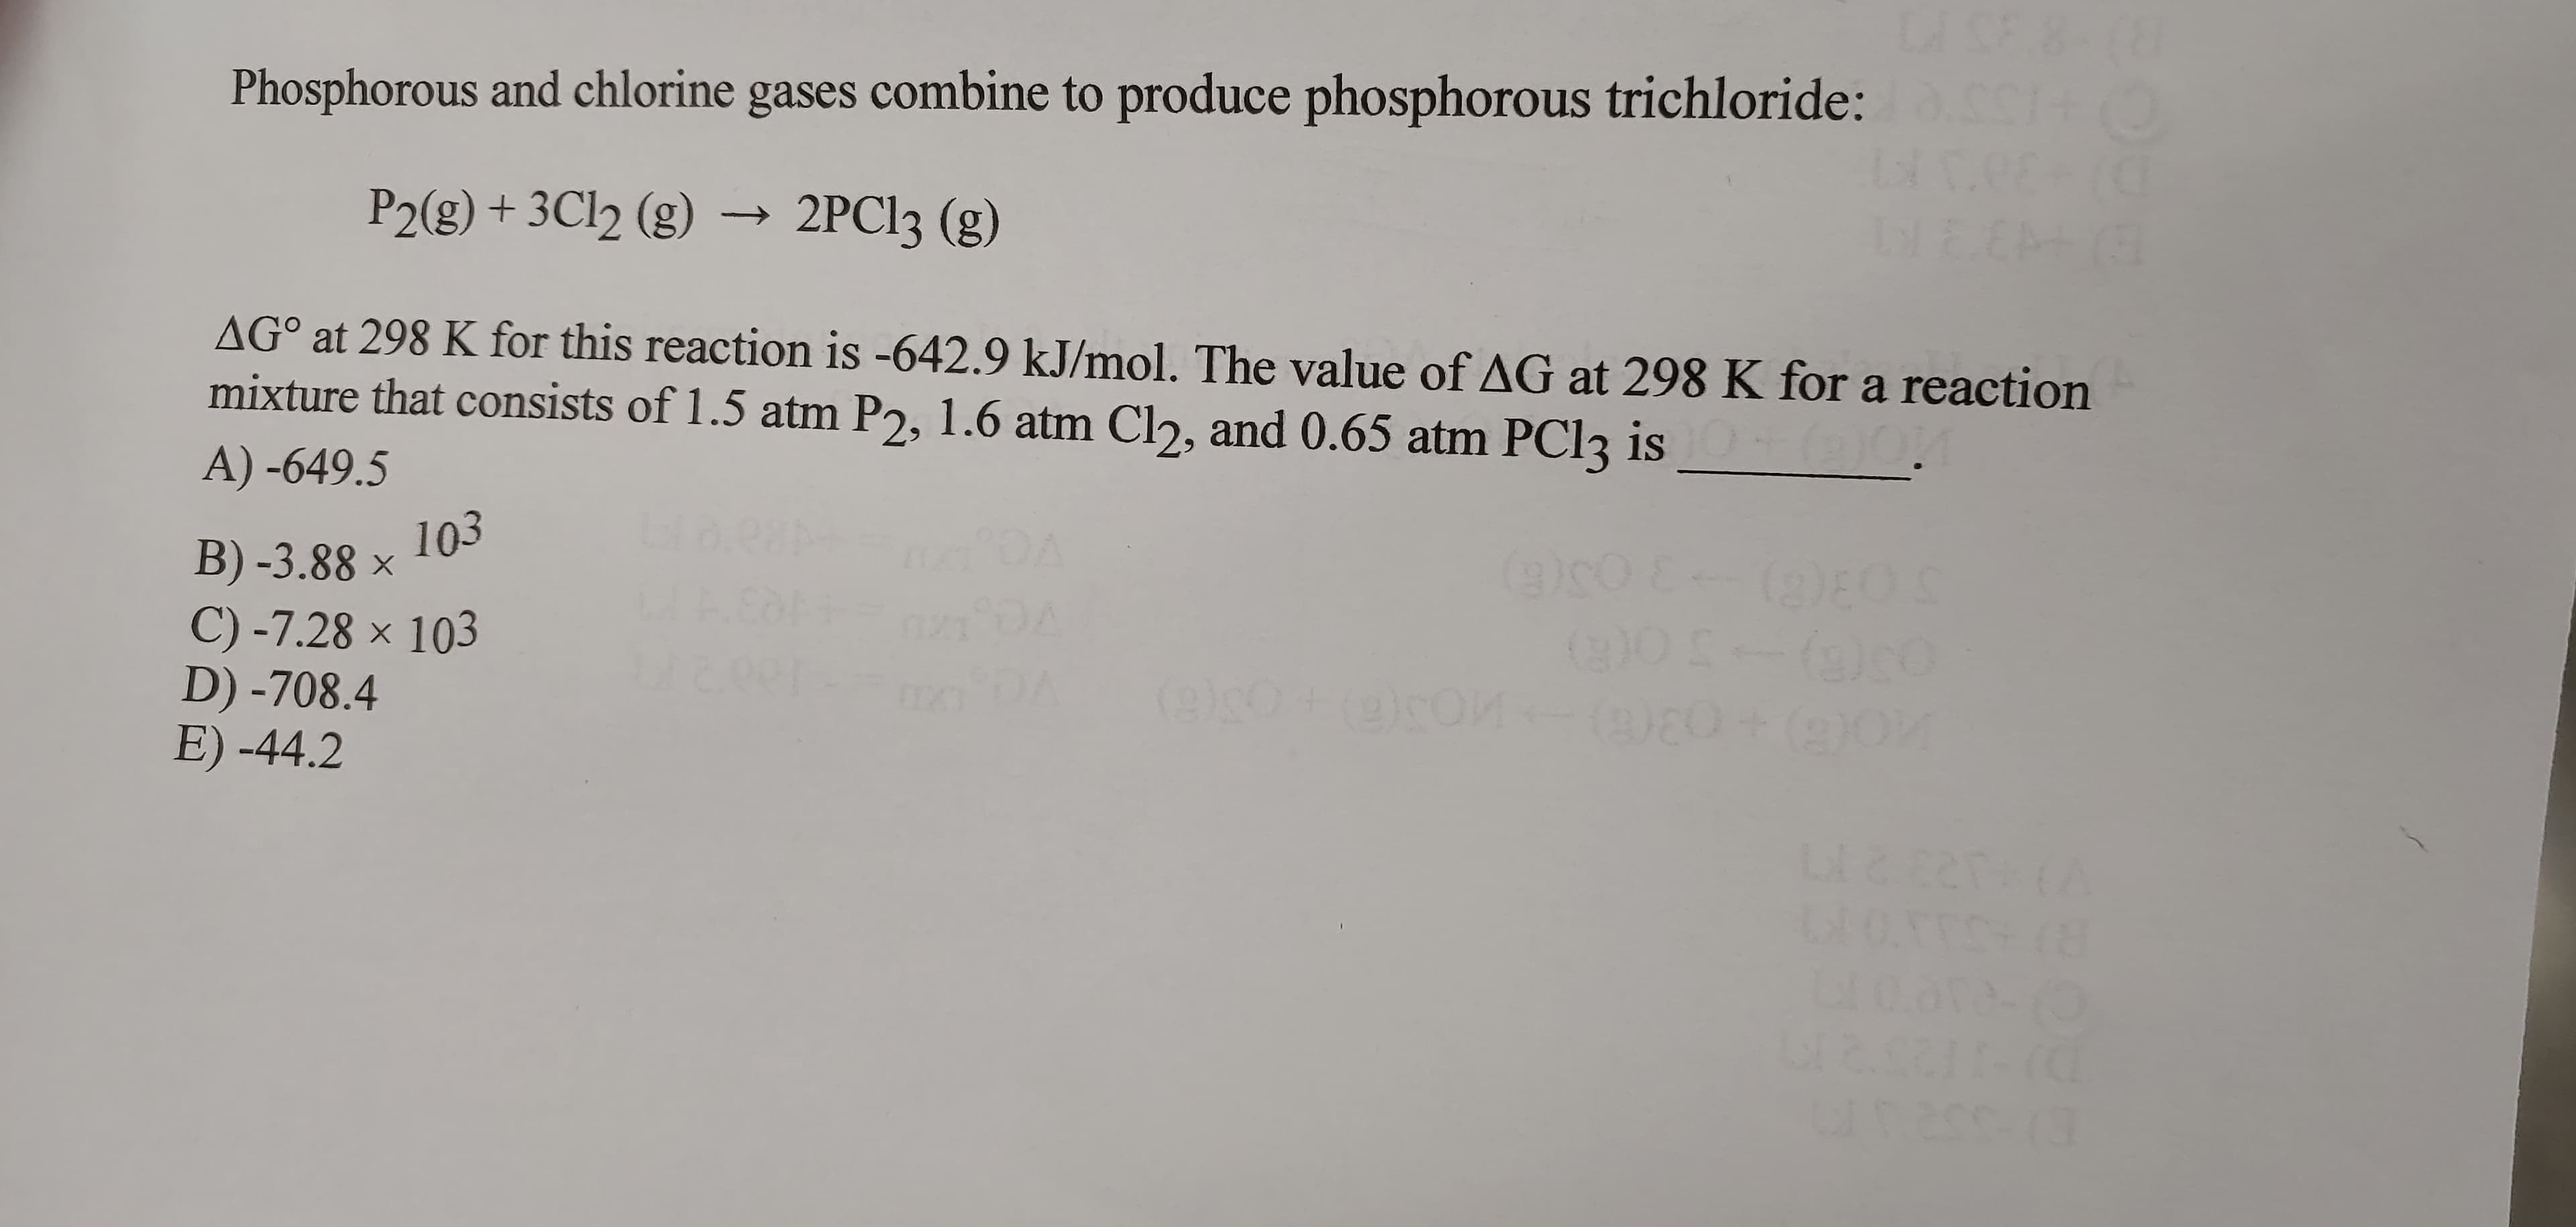 DISE 8
Phosphorous and chlorine gases combine to produce phosphorous trichloride: c+O
P2(g) + 3C12 (g) →
2PCI3 (g)
LEE
AG° at 298 K for this reaction is -642.9 kJ/mol. The value of AG at 298 K for a reaction
mixture that consists of 1.5 atm P2, 1.6 atm Cl), and 0.65 atm PC13 is
A) -649.5
103
B) -3.88 ×
C) -7.28 × 103
D) -708.4
E) -44.2
(2)8)
